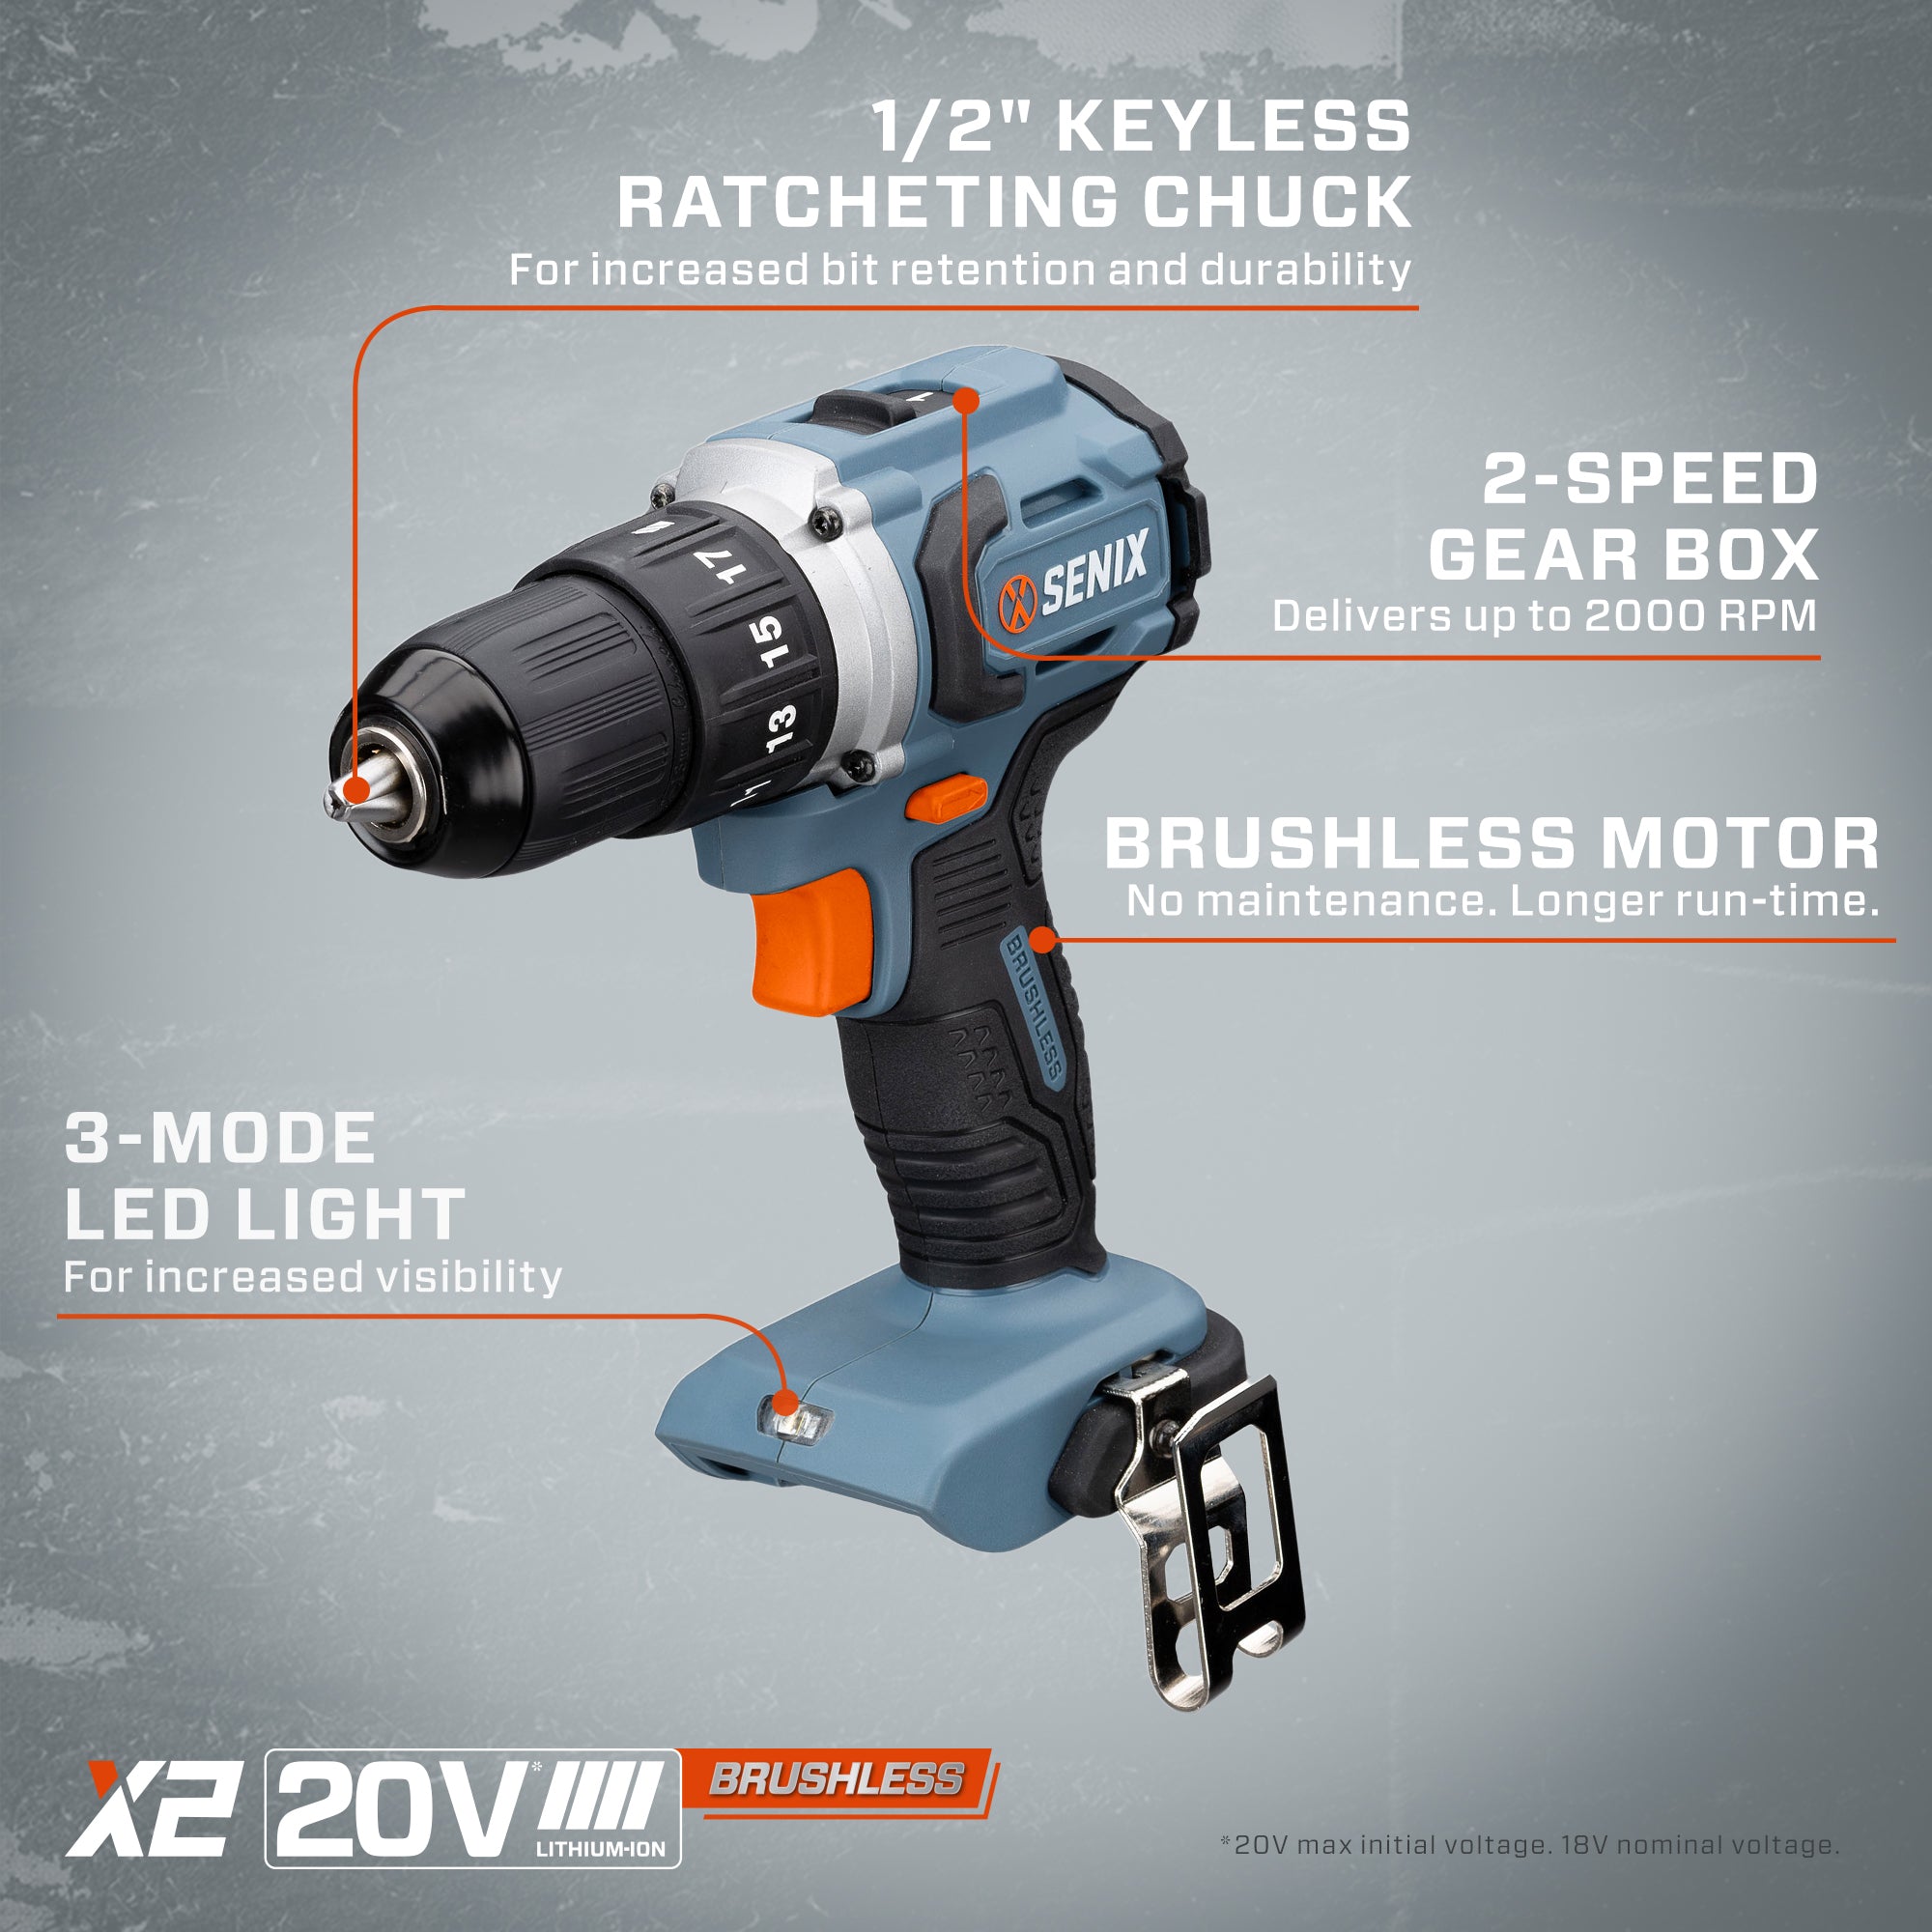 Senix 20 Volt MAX* Brushless 1/2-Inch Drill Driver, 2 Ah Battery, 2A Charger and Soft Bag Included, Pddx2-m2, Blue